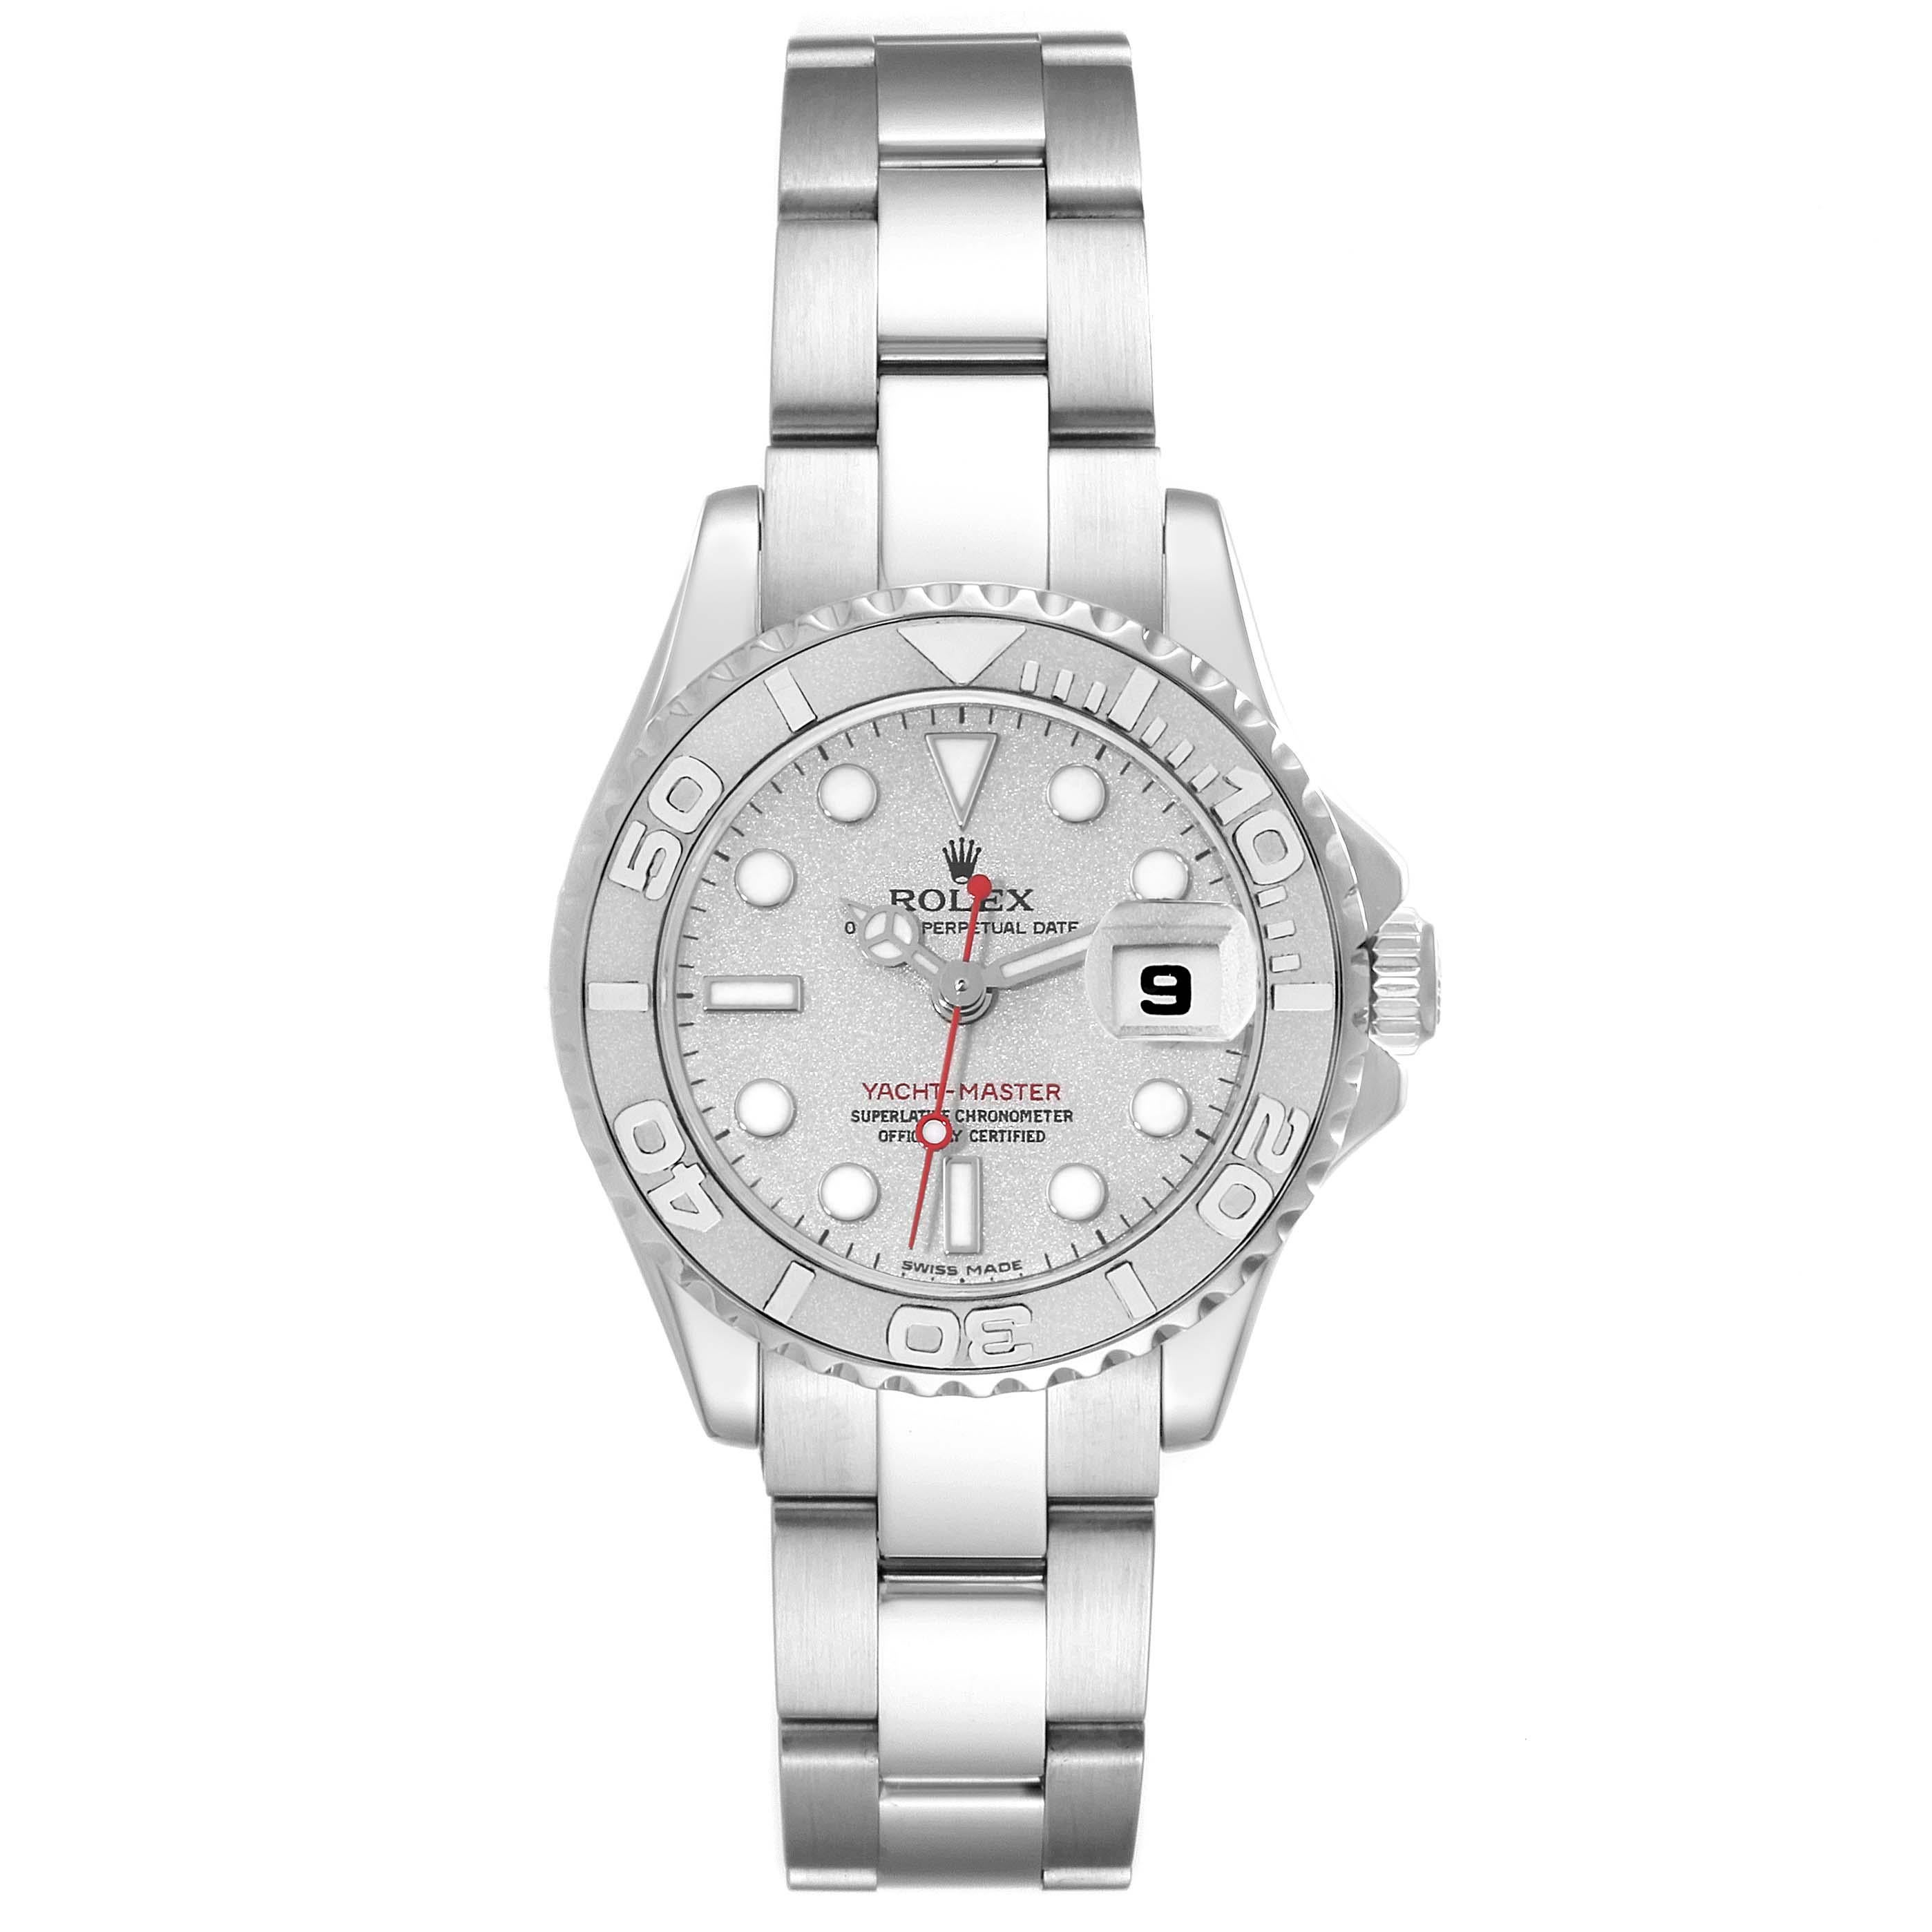 Rolex Yachtmaster 29 Steel Platinum Dial Bezel Ladies Watch 169622. Officially certified chronometer automatic self-winding movement. Stainless steel case 29 mm in diameter. Rolex logo on the crown. Platinum special time-lapse bidirectional rotating